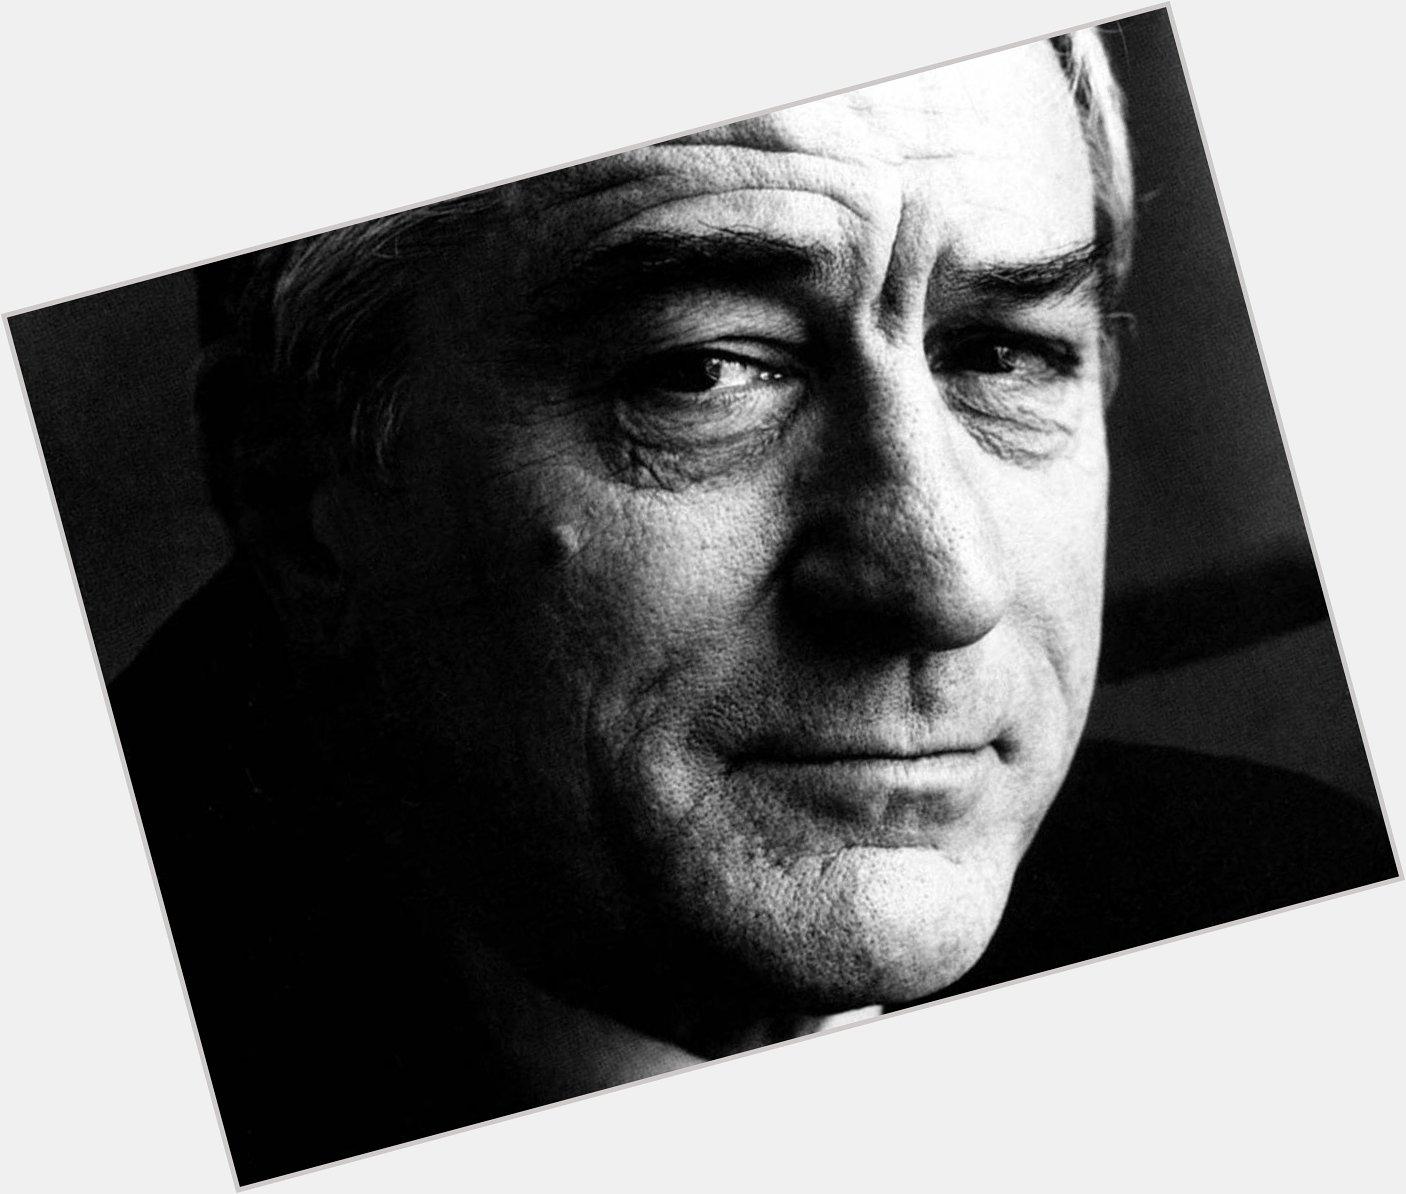 Happy birthday to my ALL TIME FAVORITE---Bob, Bobby, Robert De Niro. You are the gift that keeps on giving. 